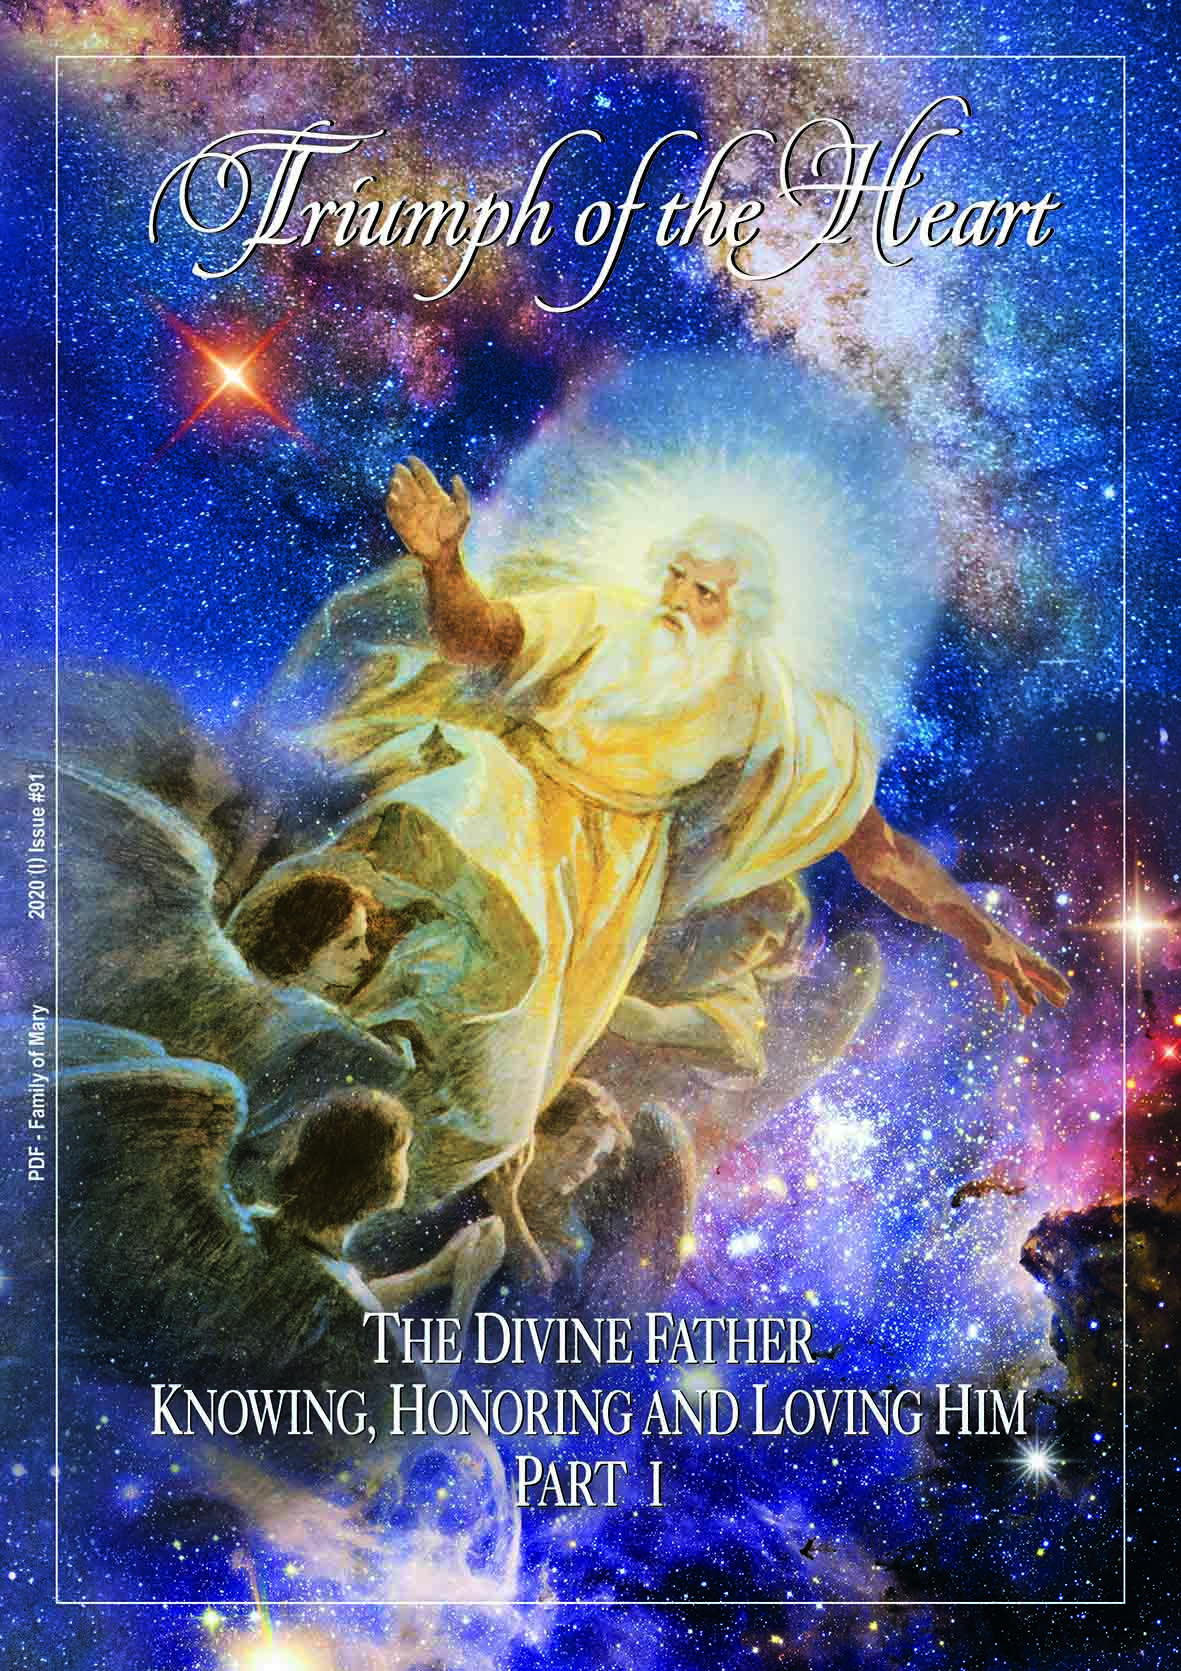 The Divine Father knowing, honoring and loving Him Part I